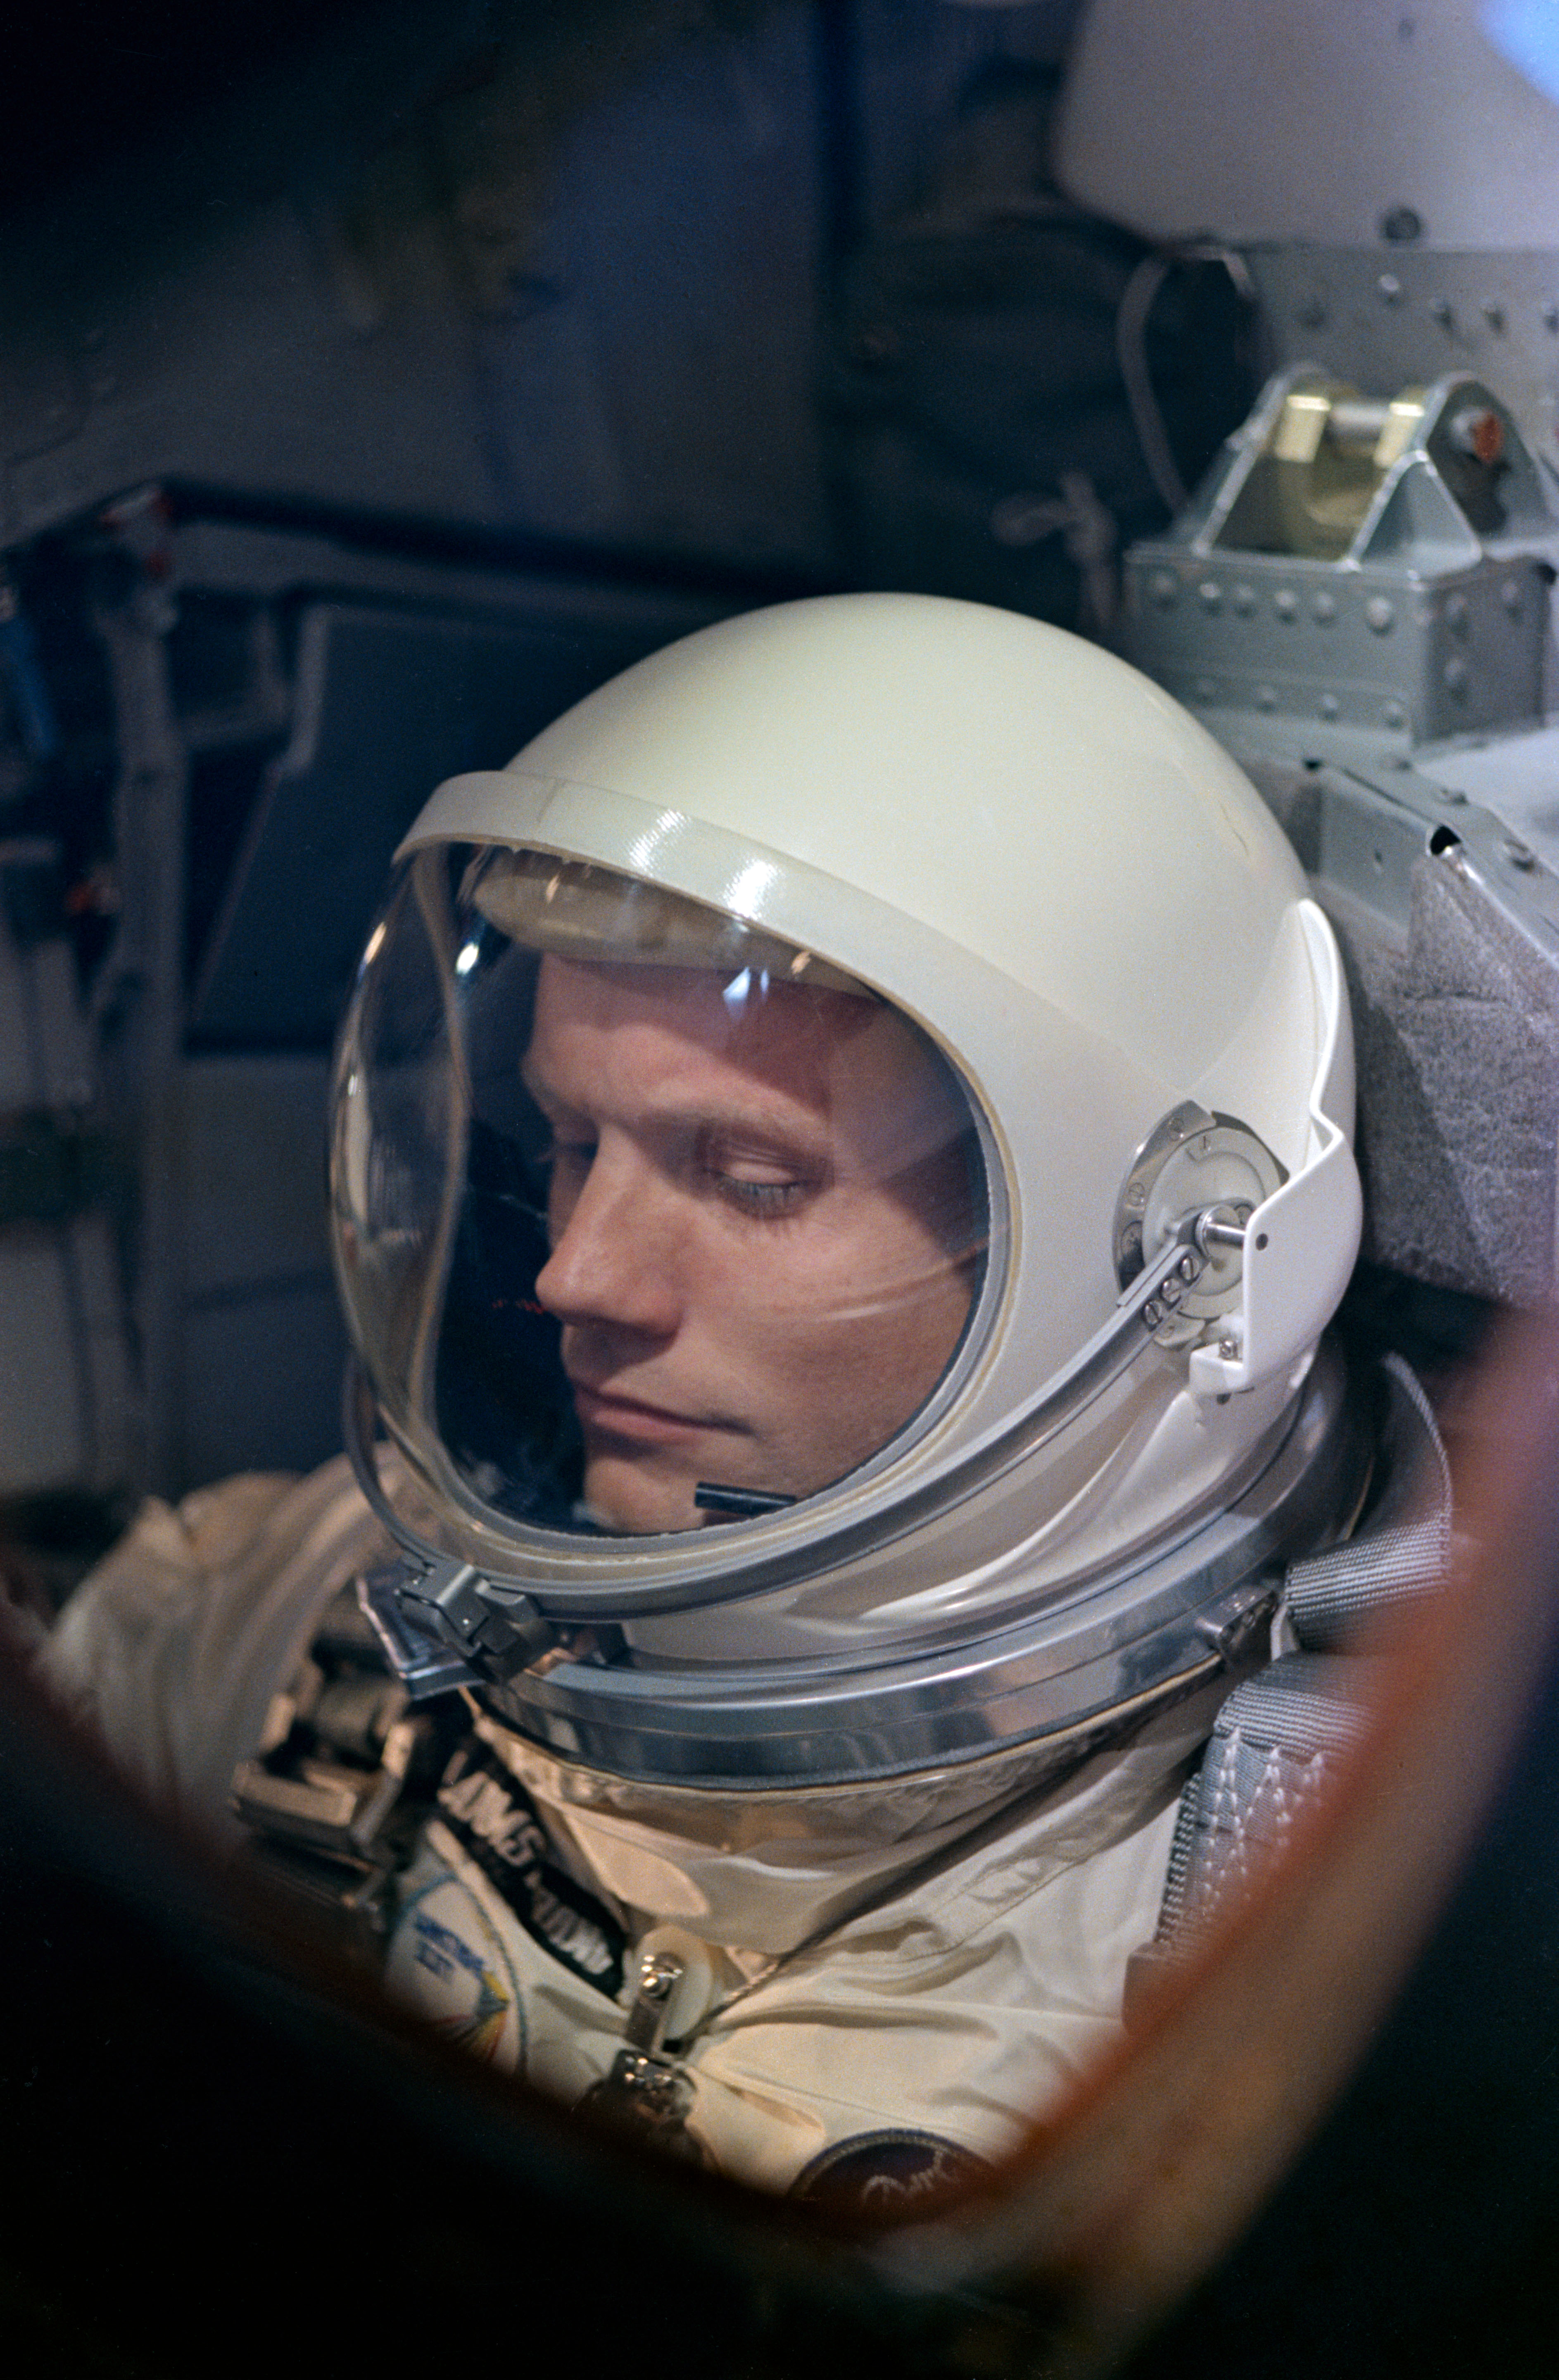 Armstrong sits in Gemini VIII prior to liftoff